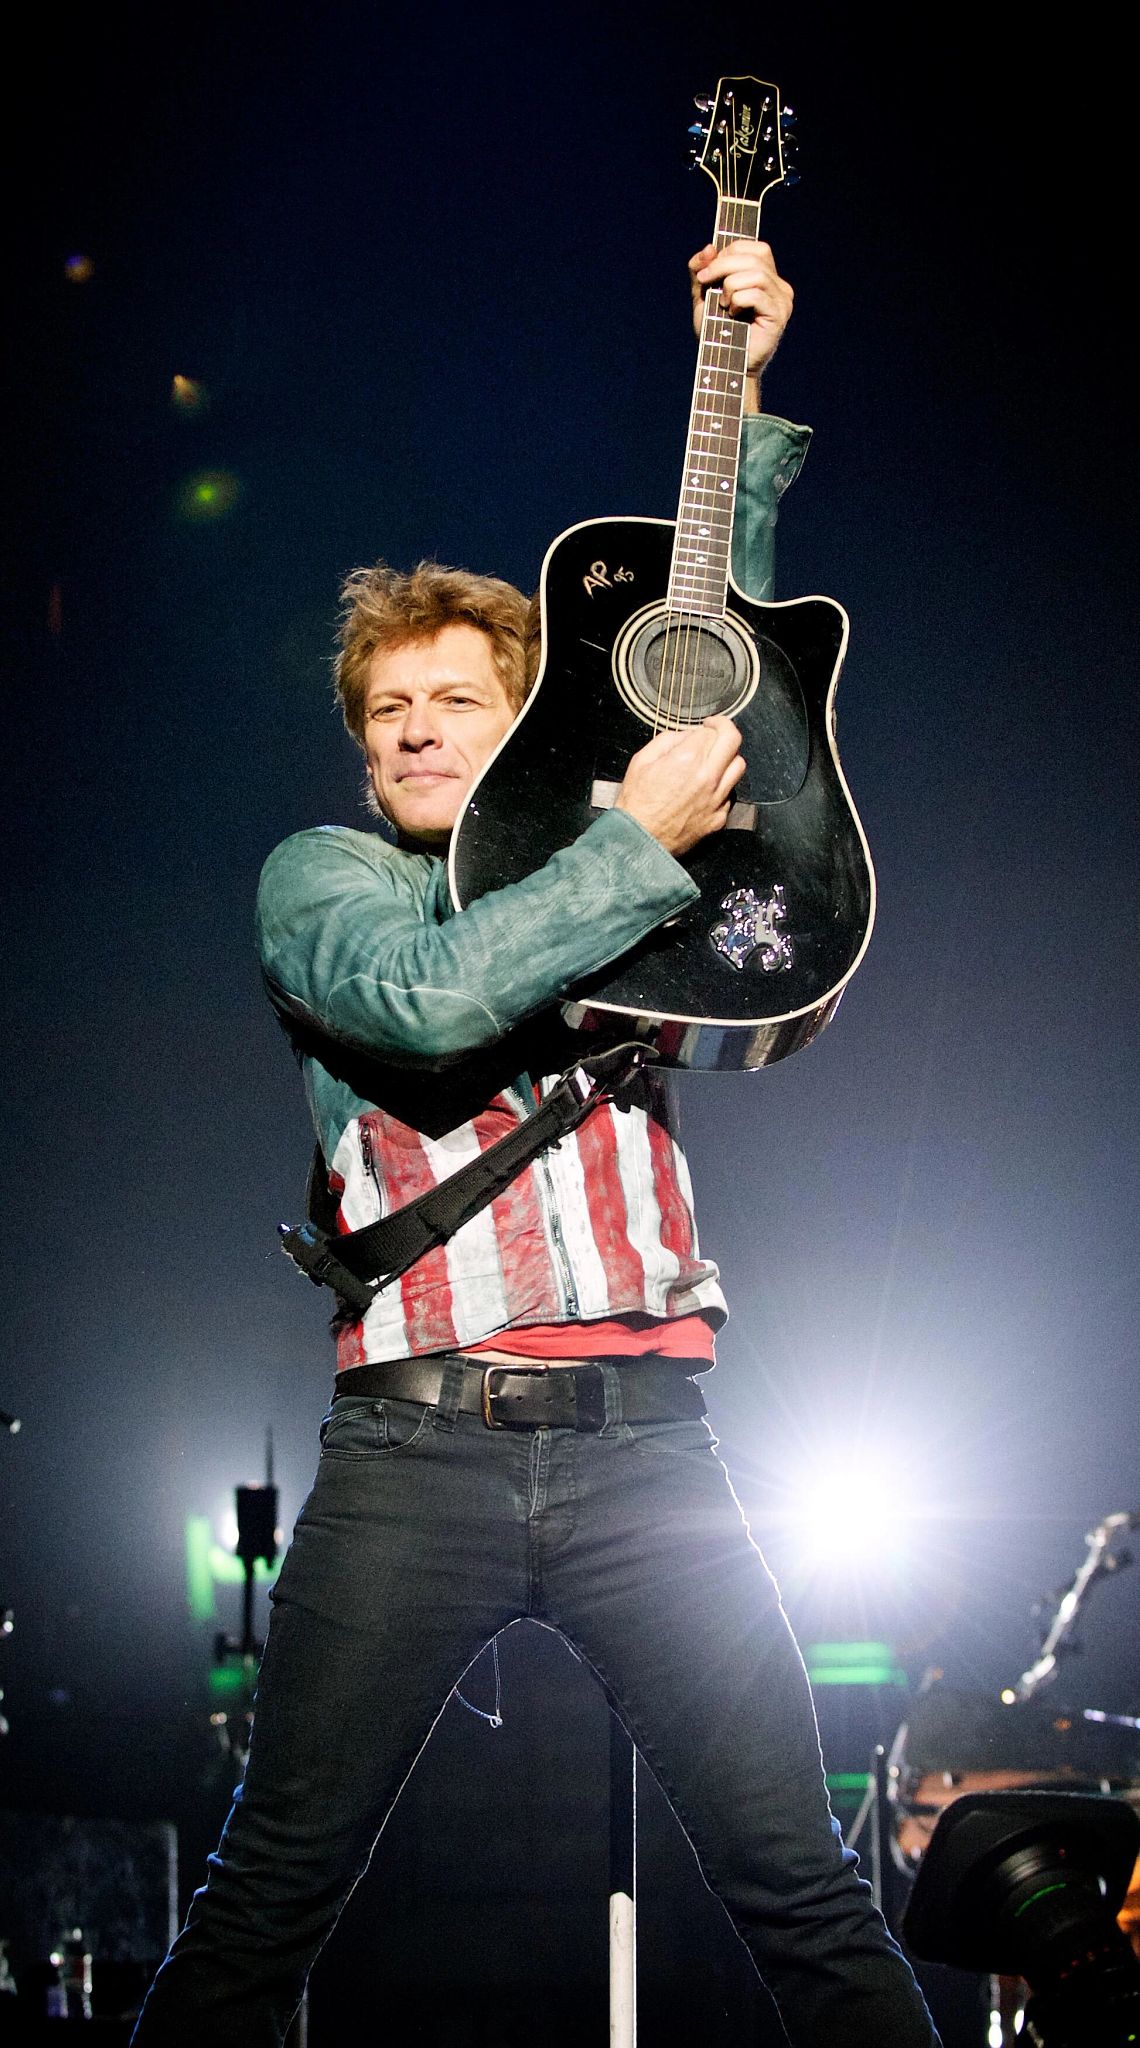 Jon Bon Jovi raises his guitar in the air during his performance at American Airlines Center in Dallas